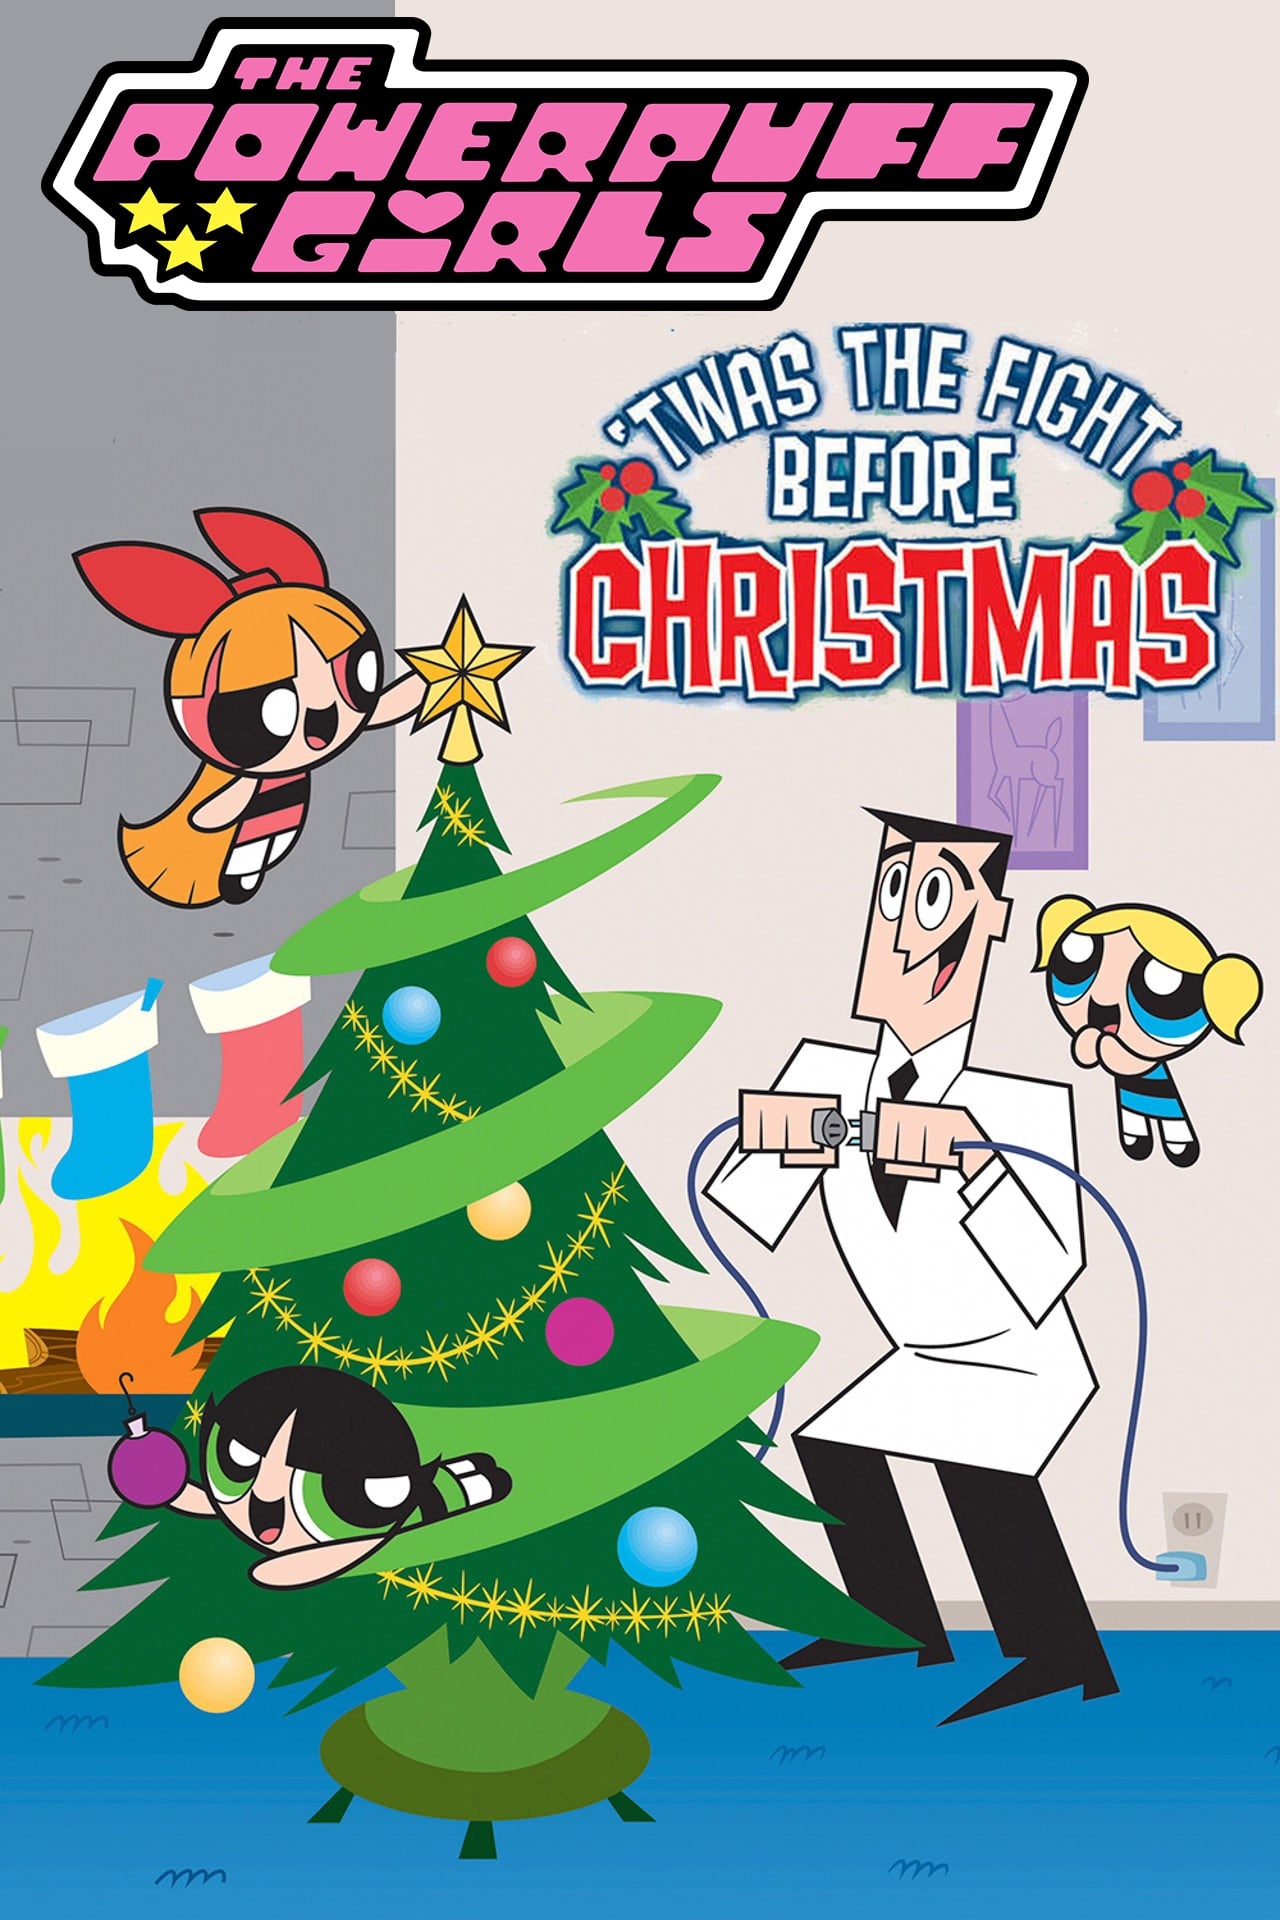 The Powerpuff Girls: 'Twas the Fight Before Christmas - 123movies | Watch Online Full Movies TV ...